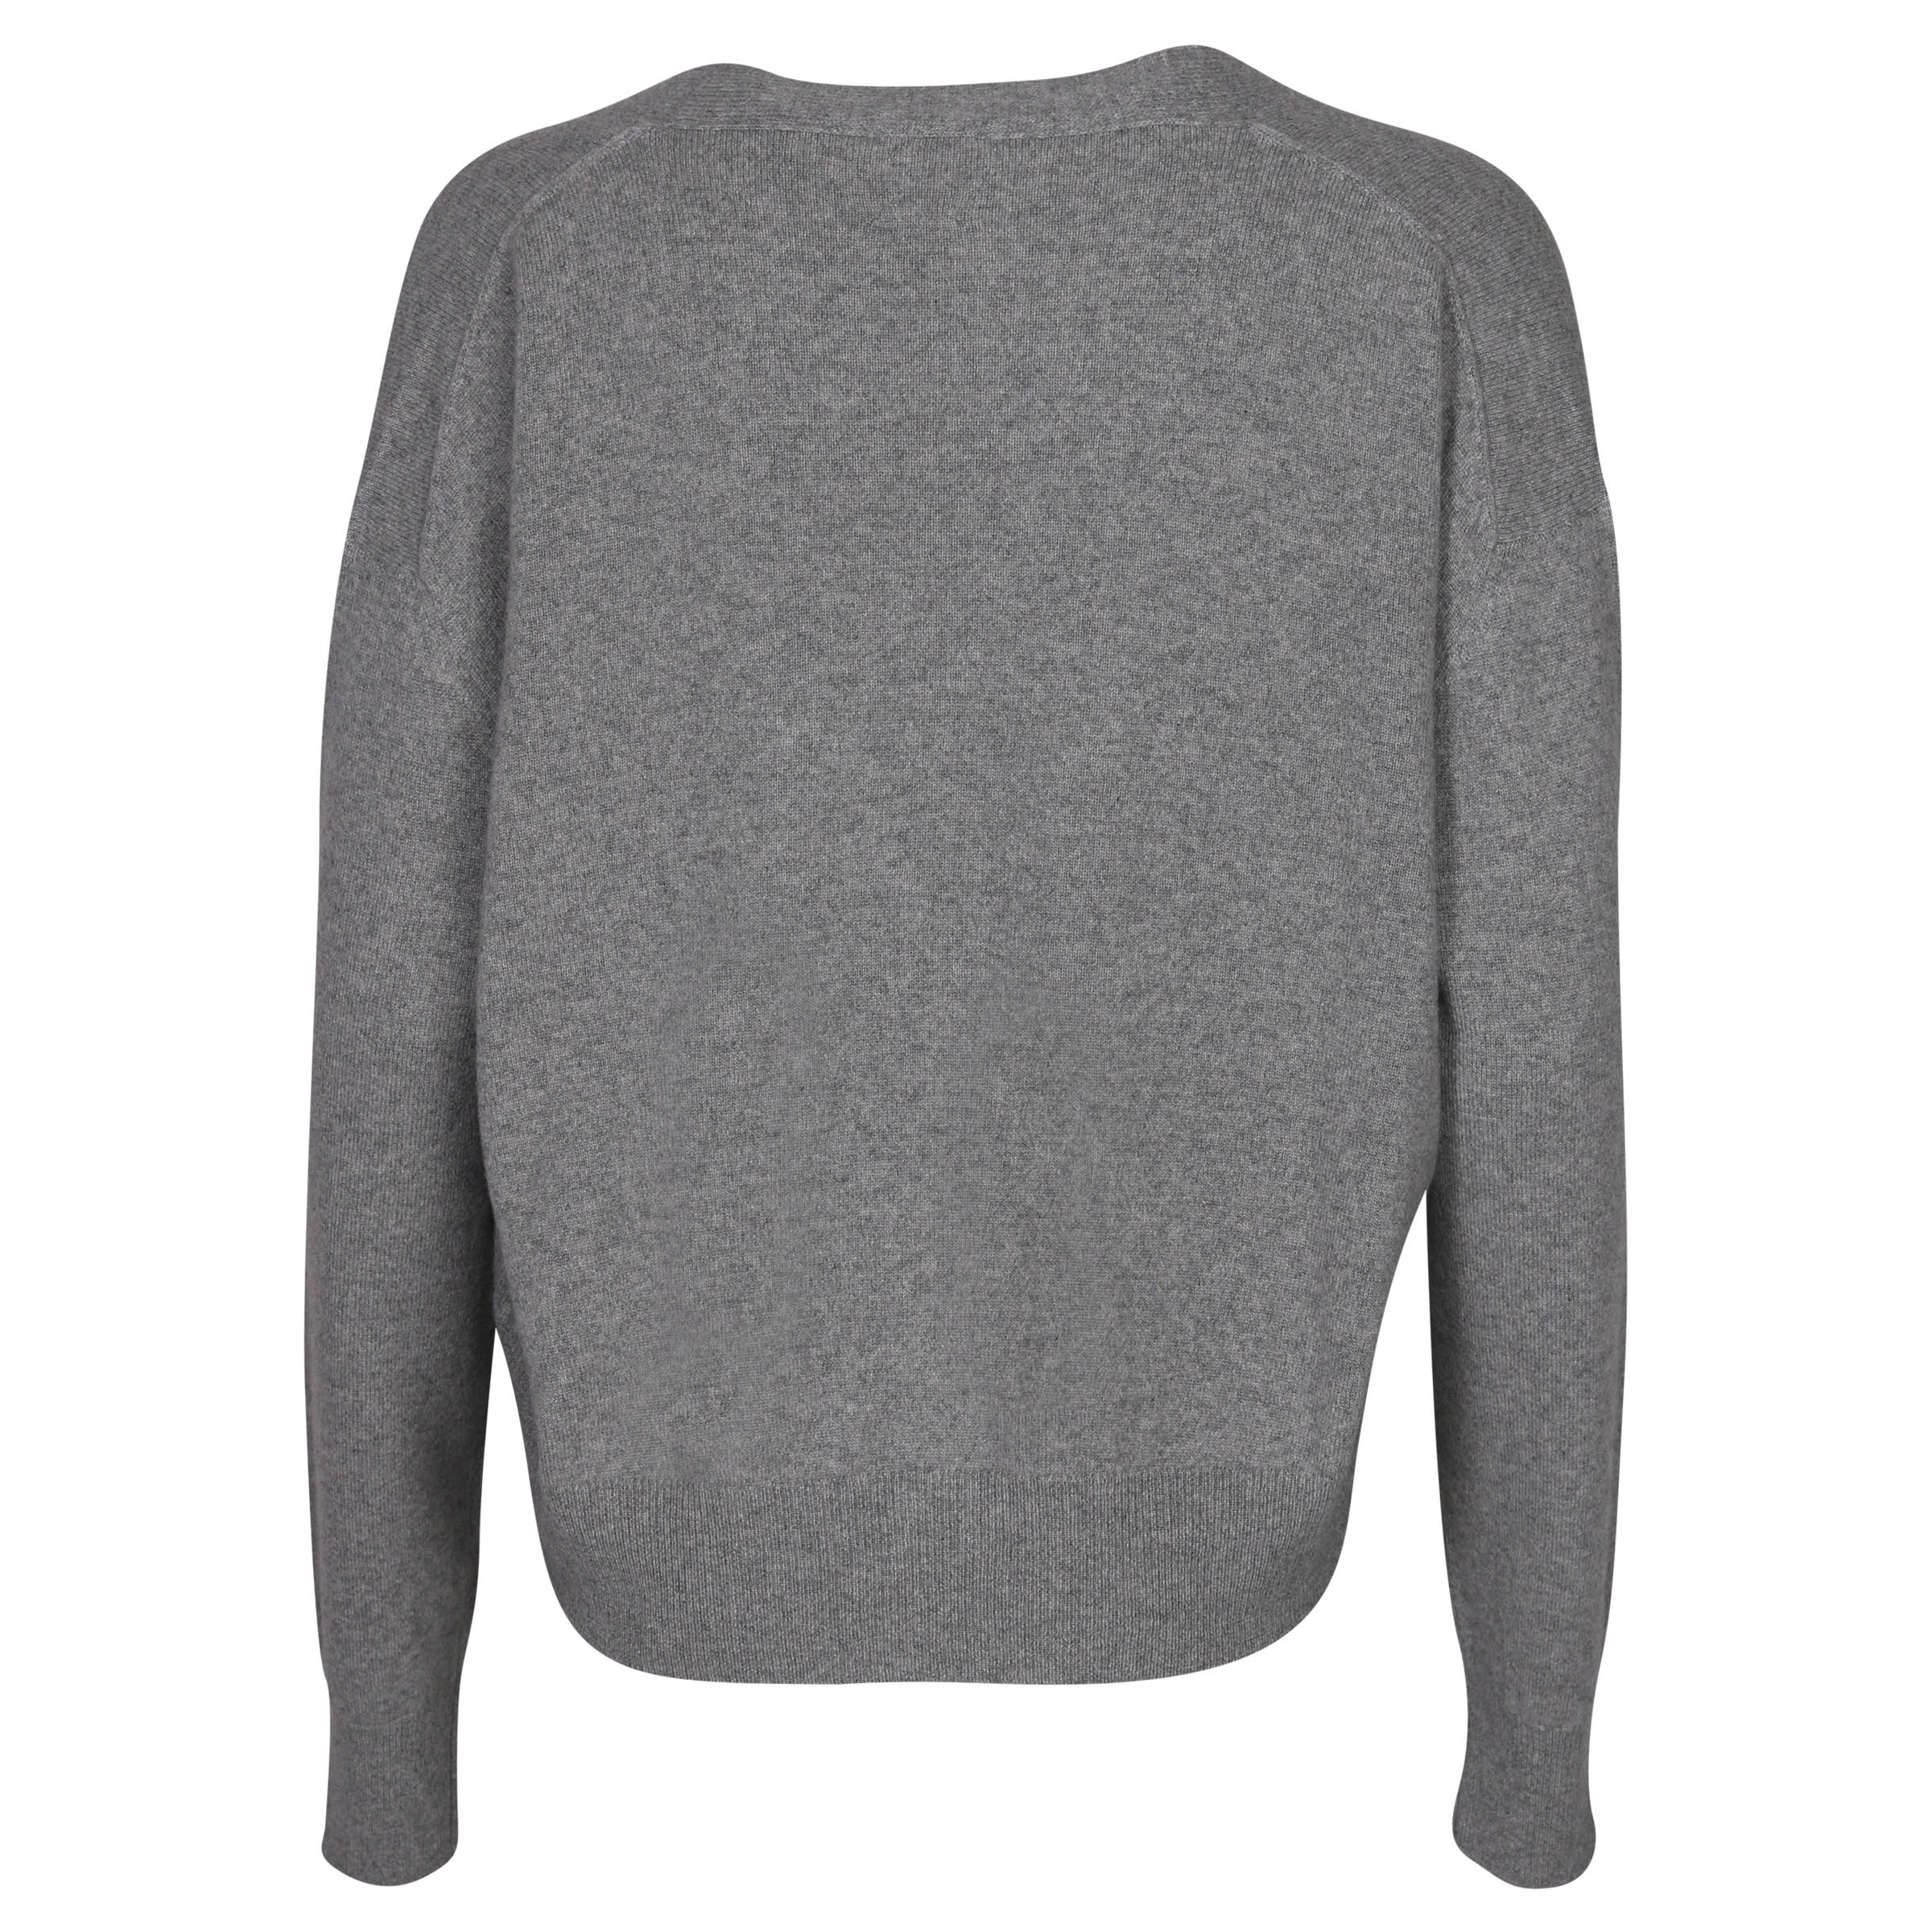 Phiili Recycled Cashmere Cardigan in Grey XS/S